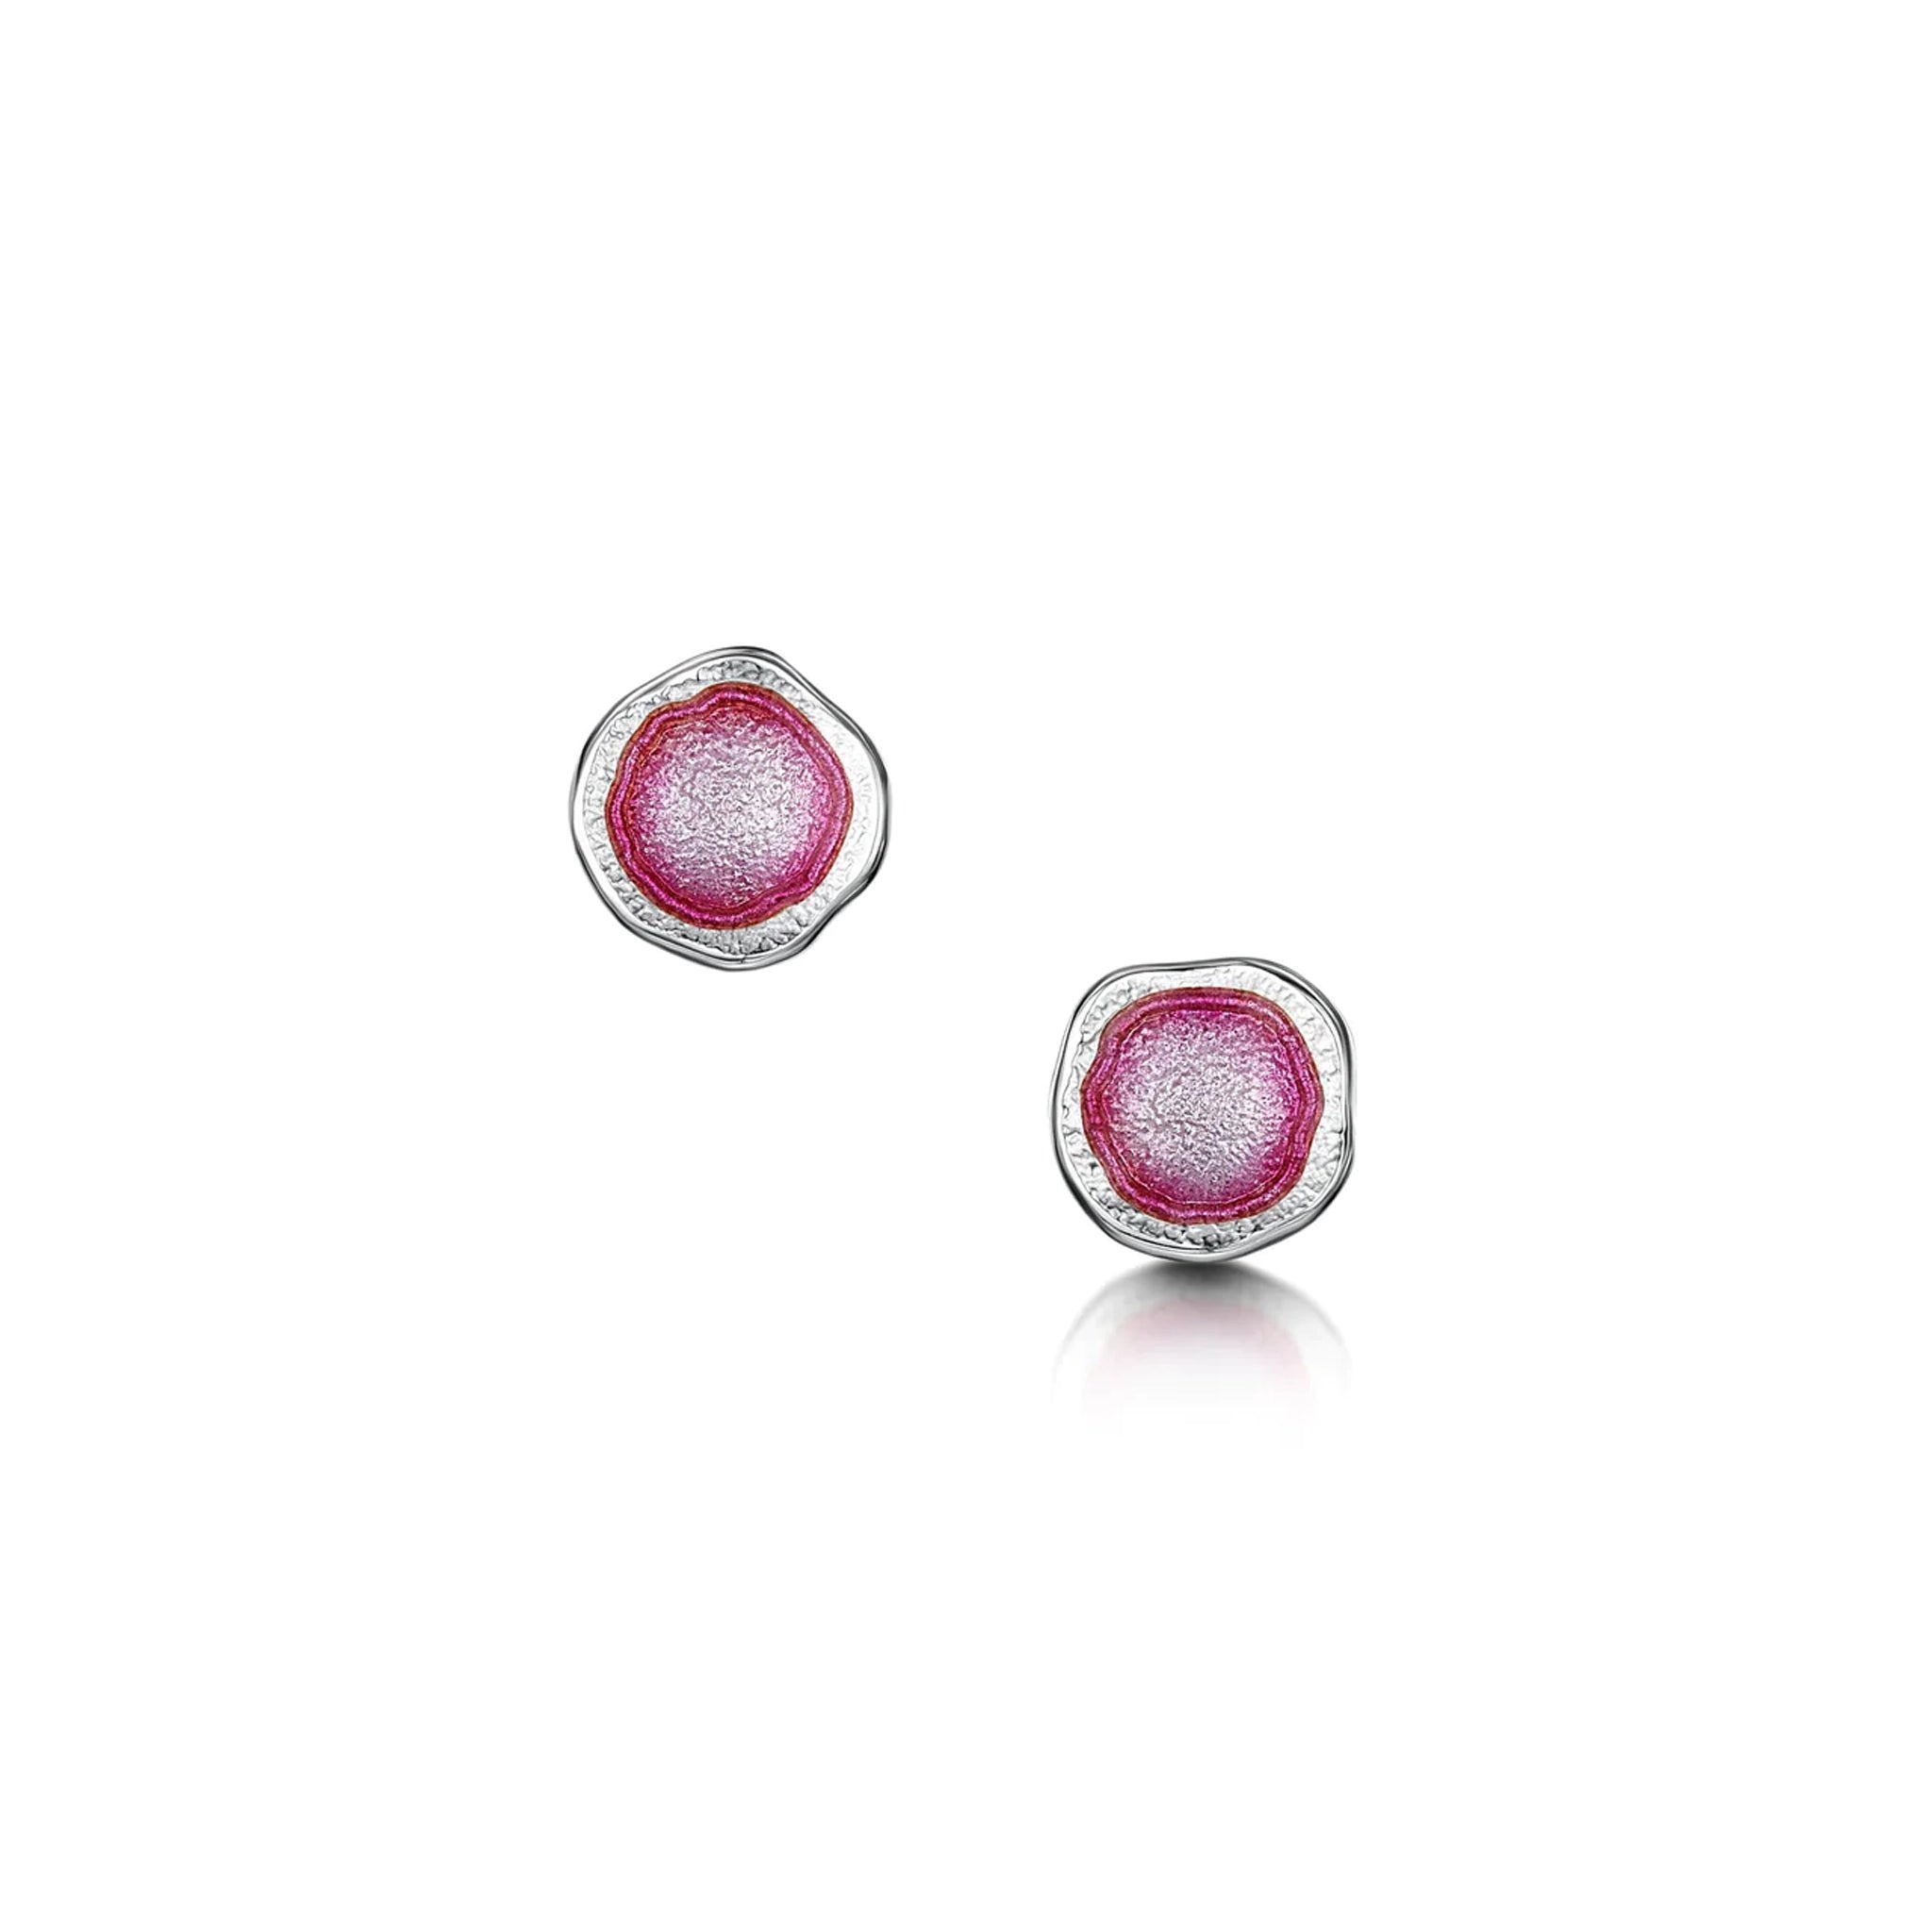 Silver round stud earrings with irregular and organic shape, subtle texture and bright pink enamelled centres